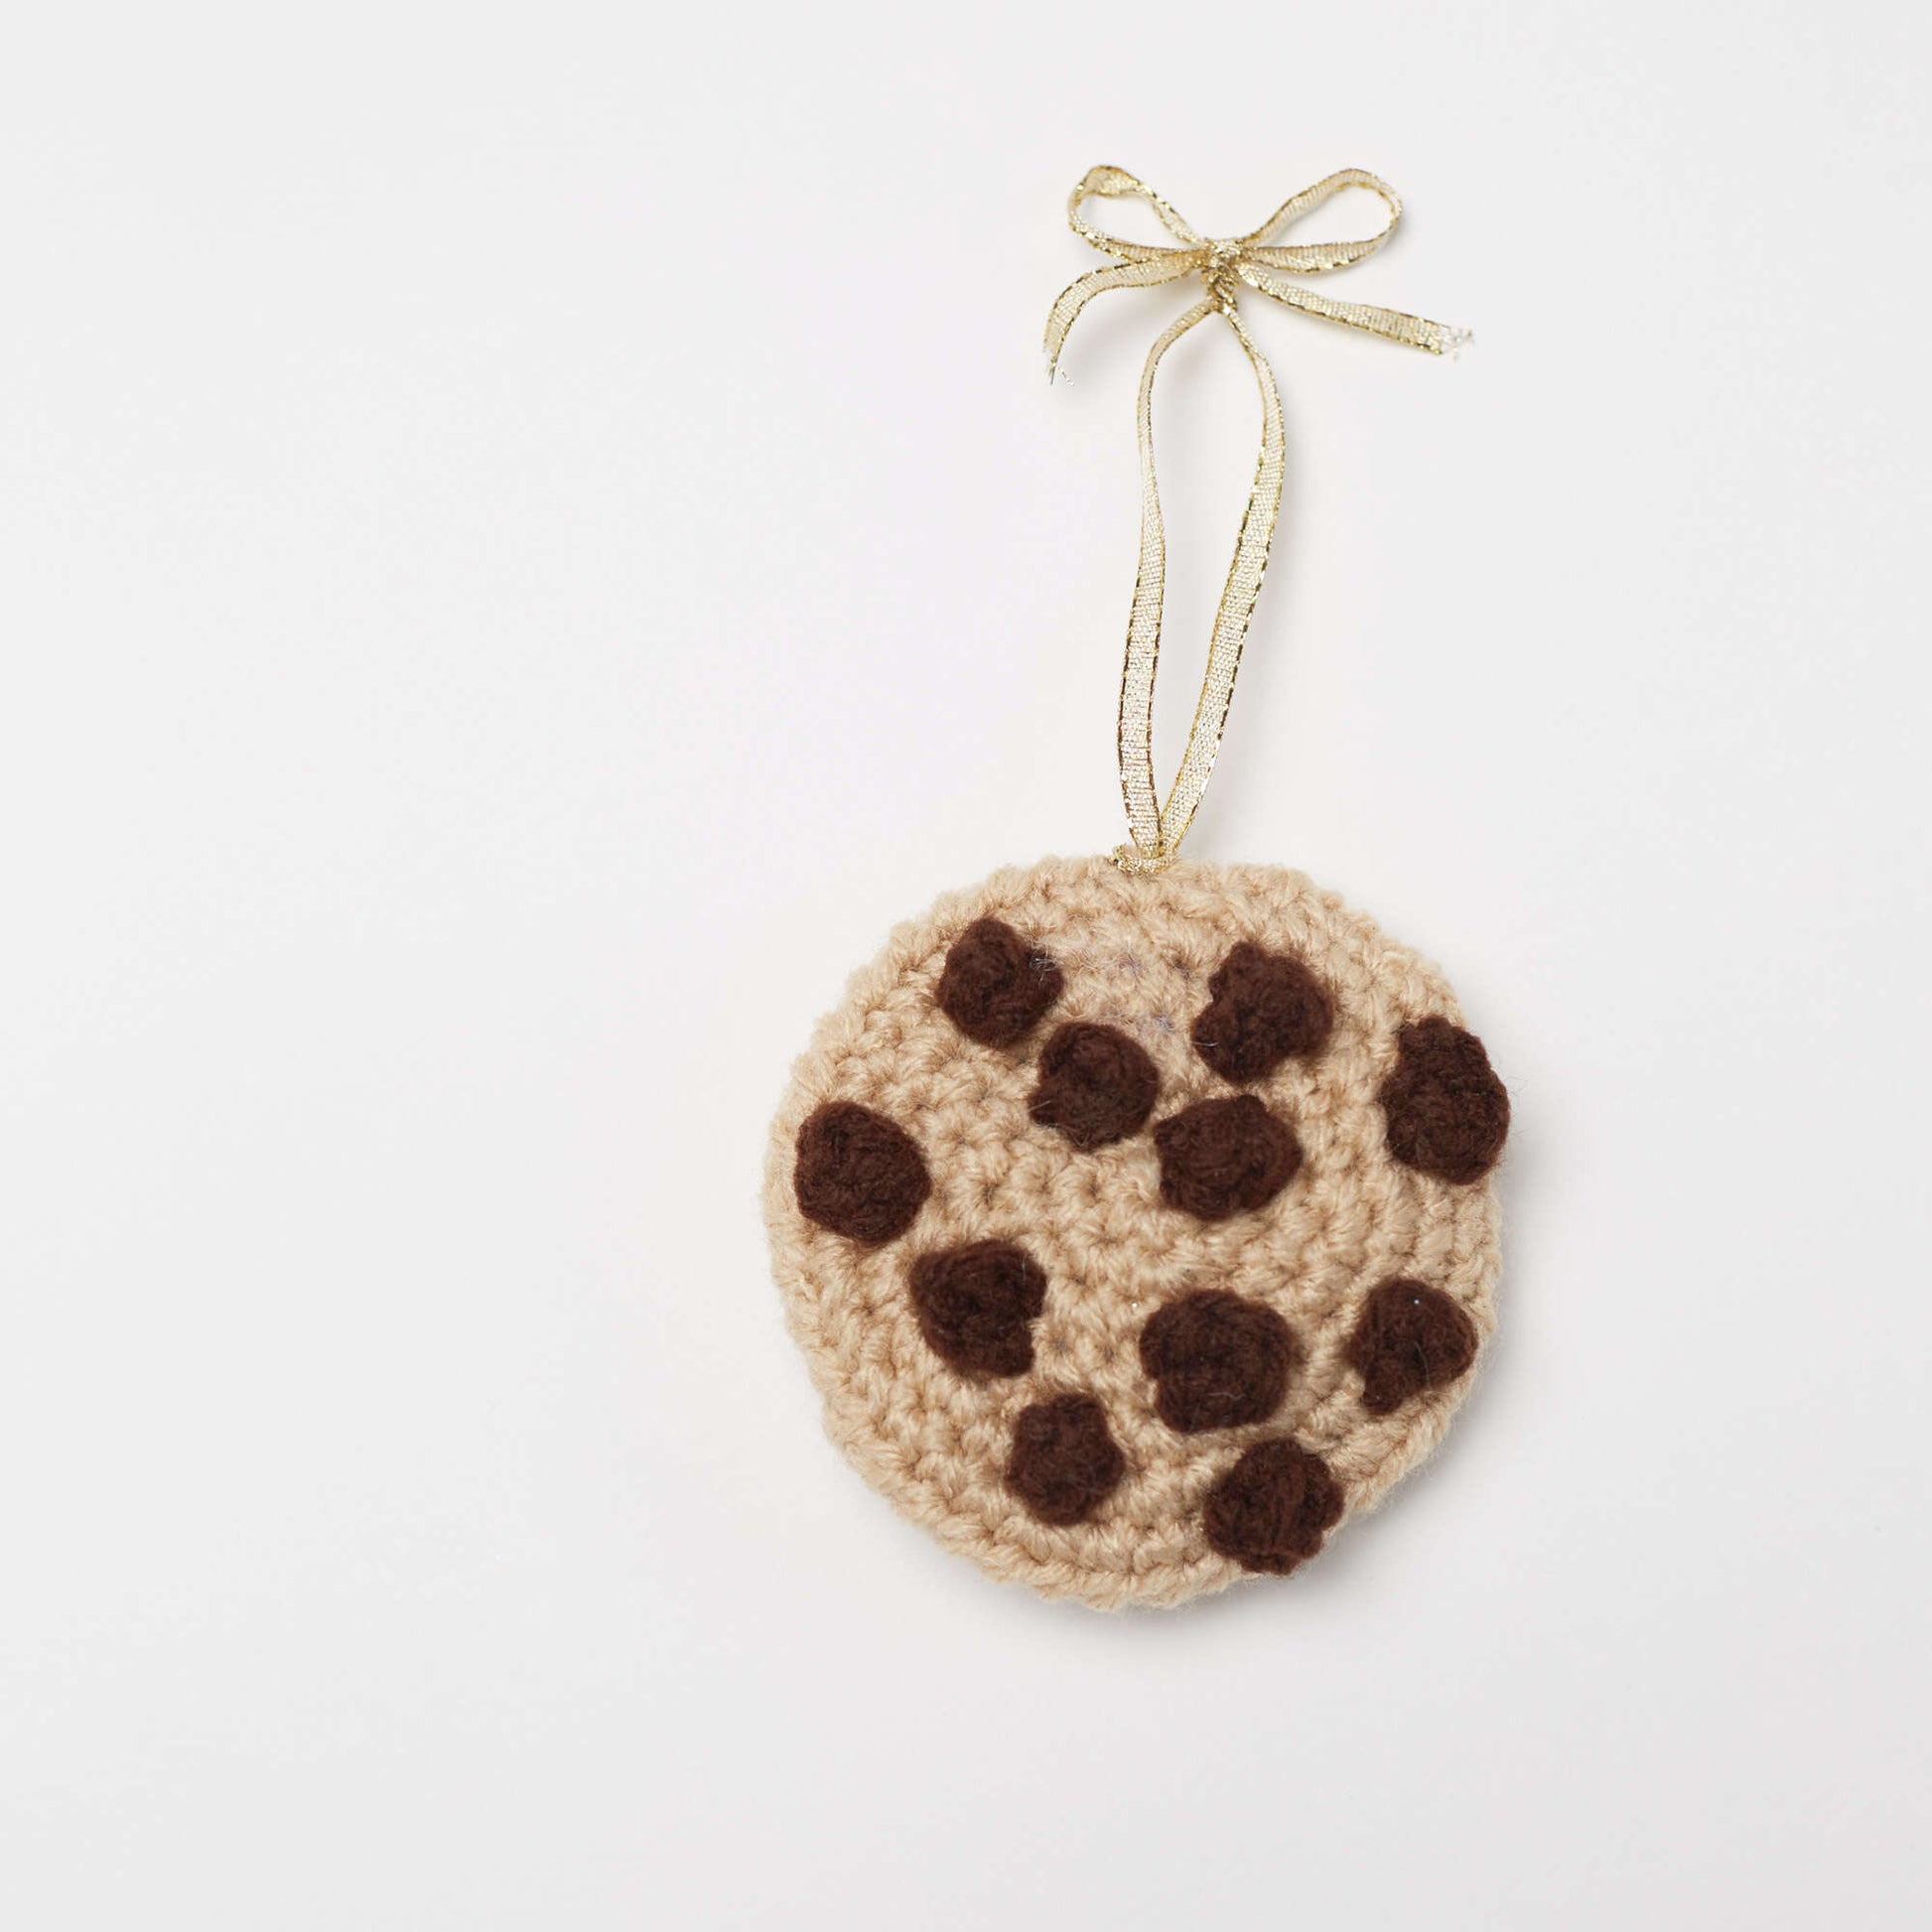 Free Red Heart Chocolate Chunk Cookie Ornament Crochet Pattern